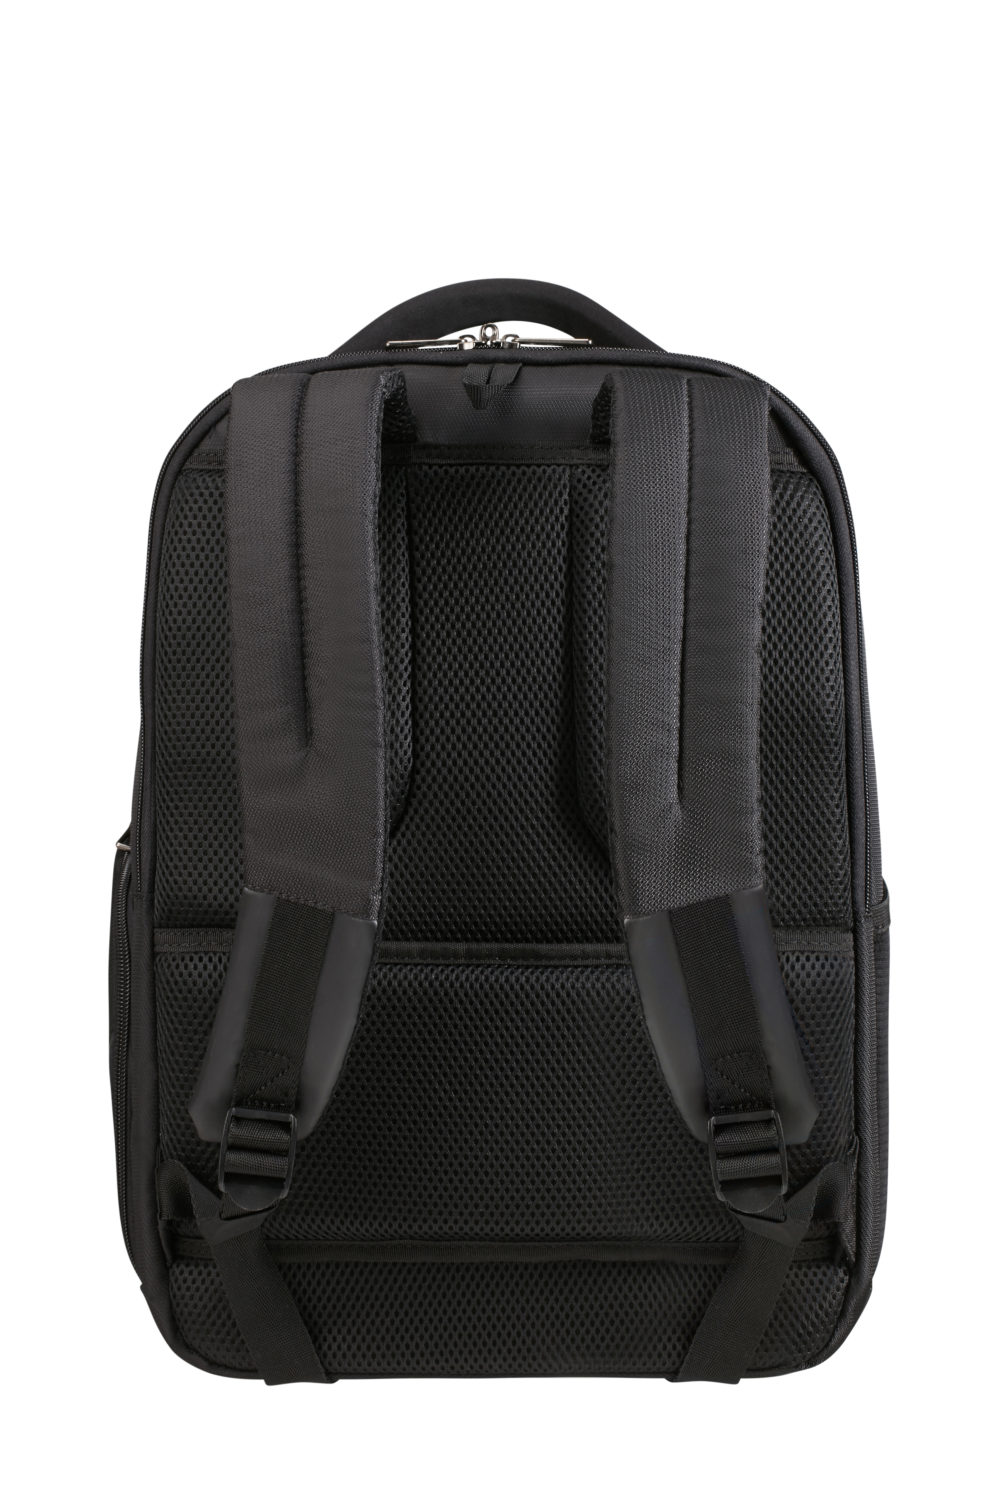 VECTURA EVO LAPT.BACKPACK 15.6